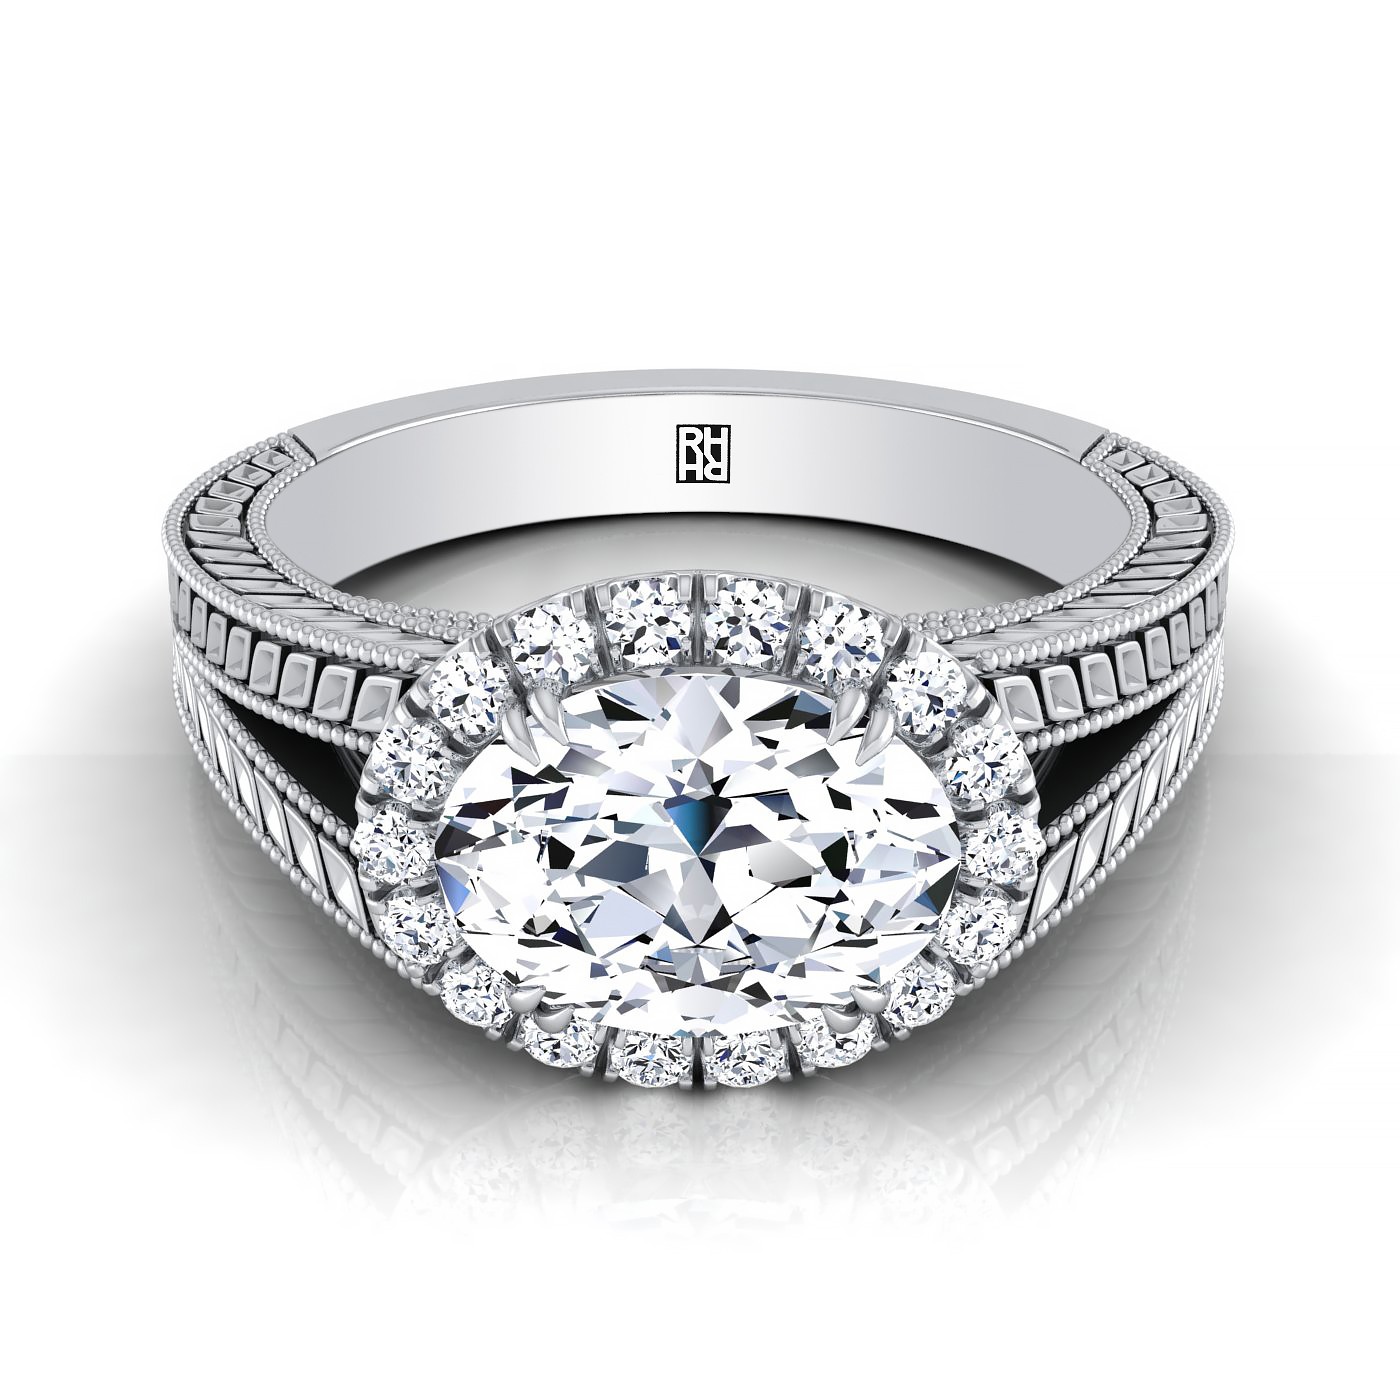 The Top Wedding and Engagement Ring Engraving Ideas & Tips